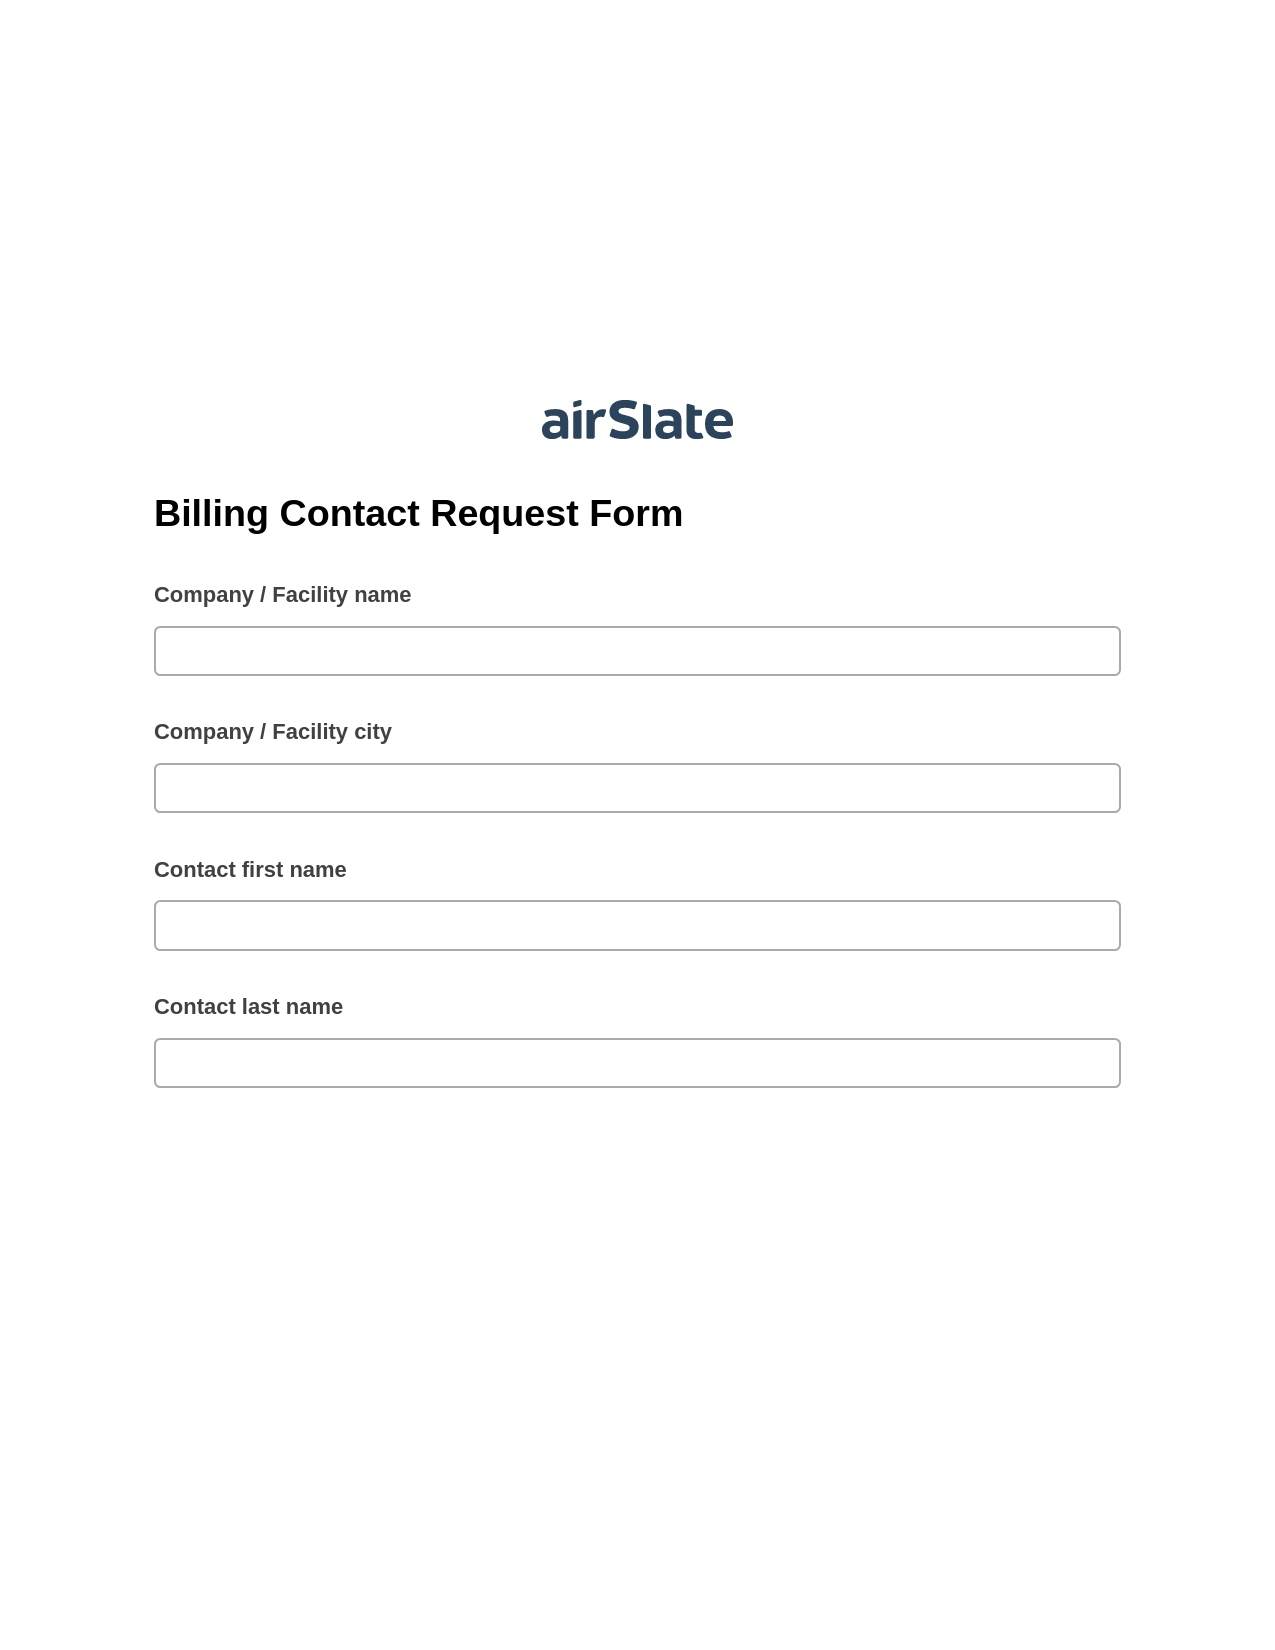 Multirole Billing Contact Request Form Pre-fill Dropdowns from CSV File Bot, Audit Trail Bot, Box Bot